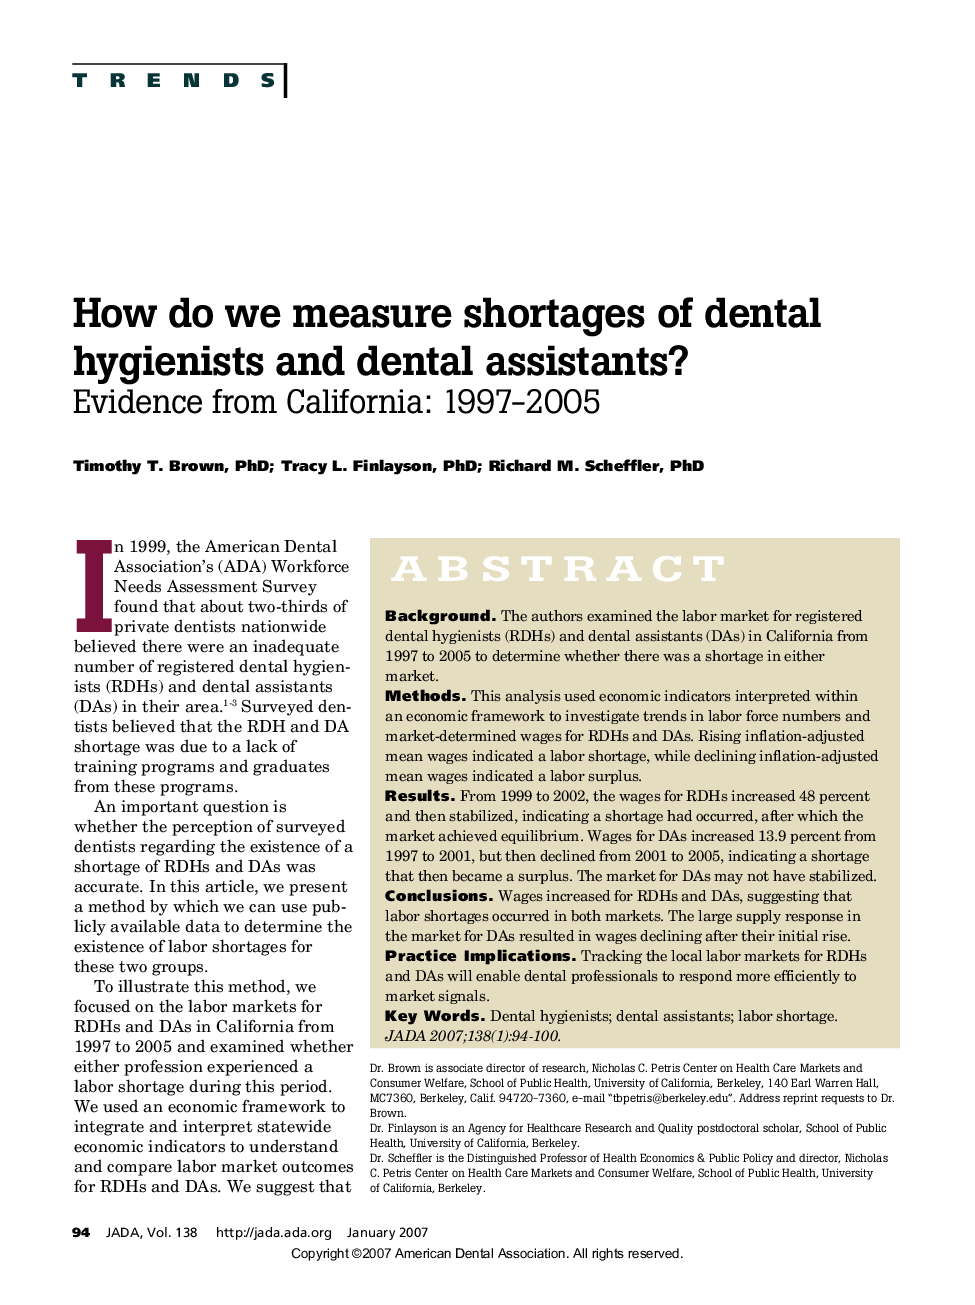 How do we measure shortages of dental hygienists and dental assistants?